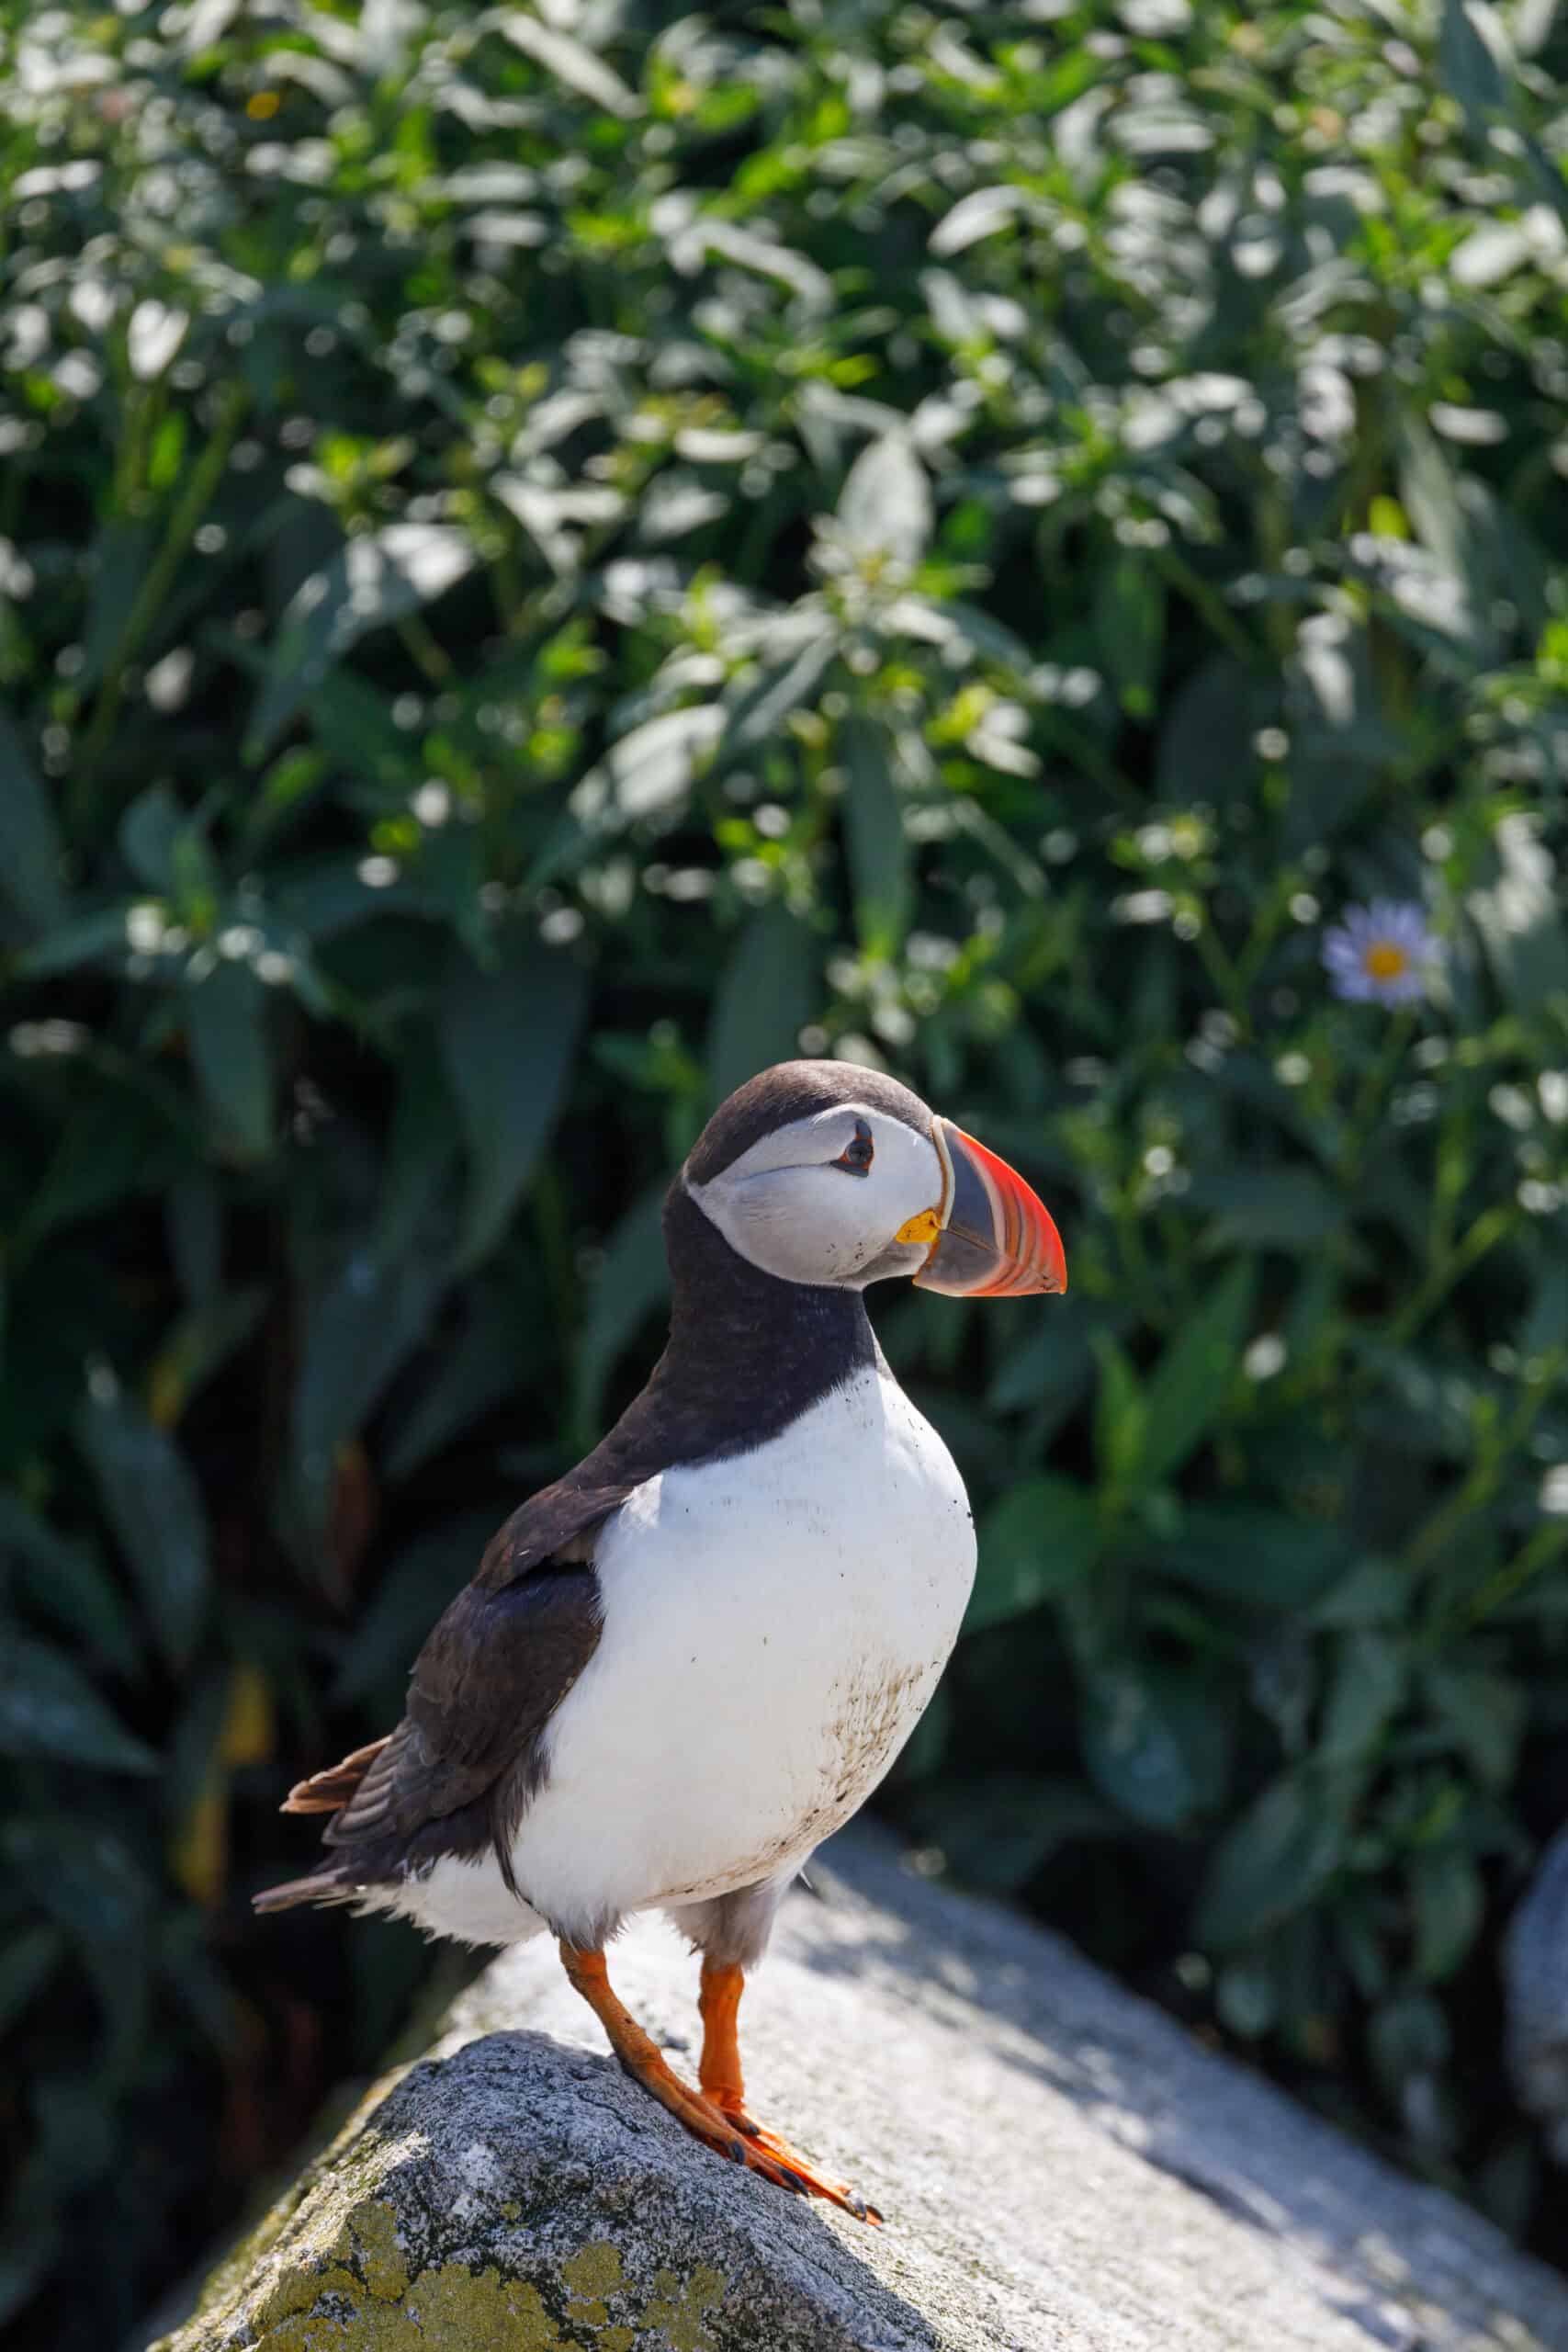 One puffin perched on a sunny rock with green foliage behind it for puffins in Maine